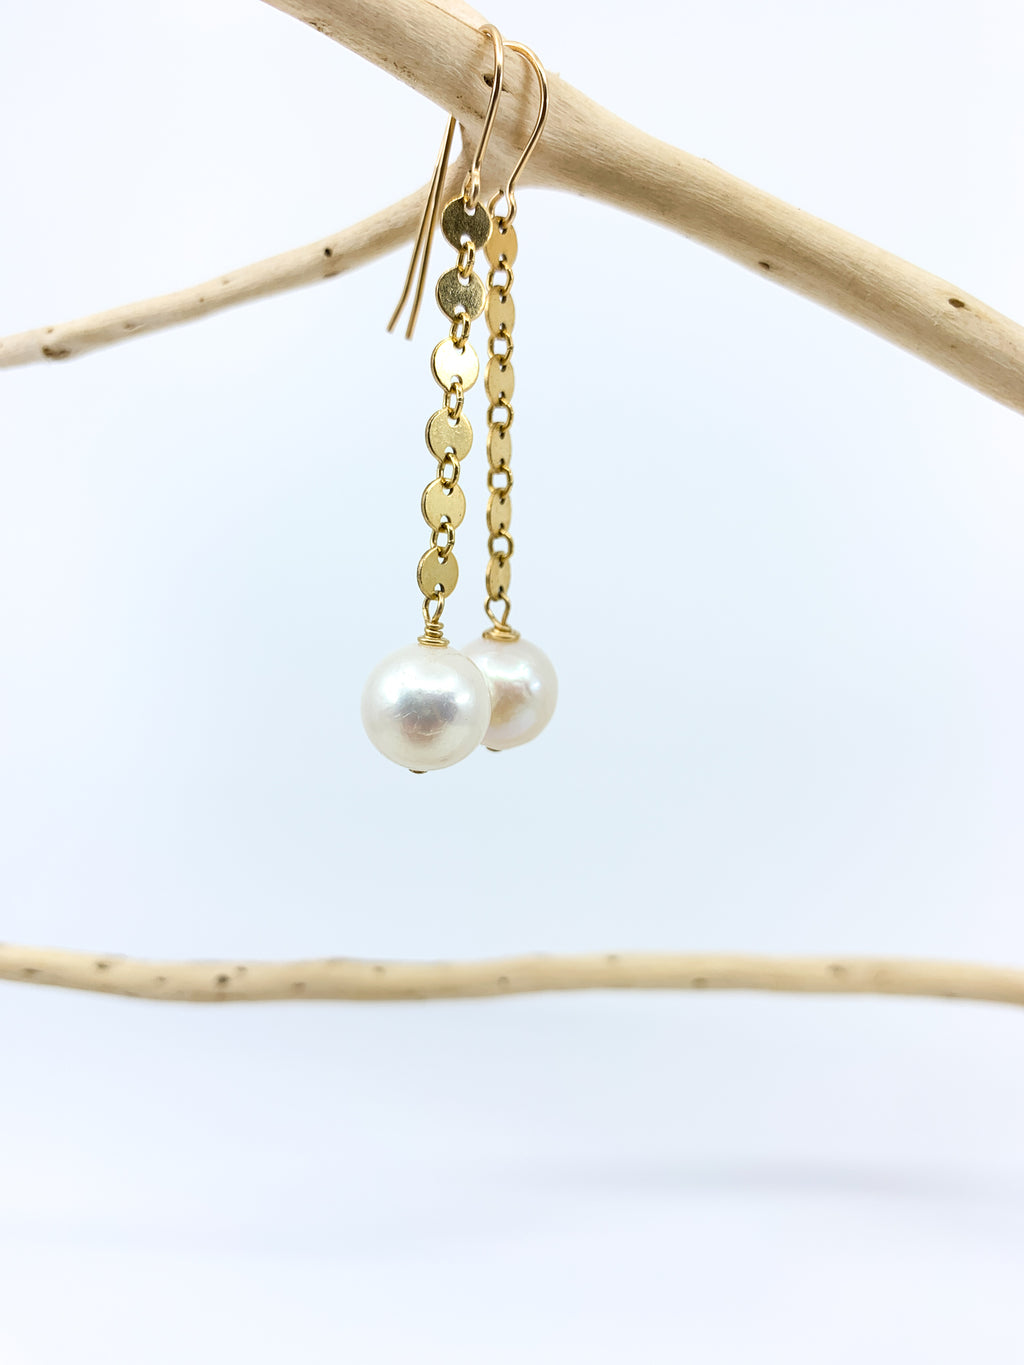 white pearls with gold fill chain earrings by eve black jewelry made in Hawaii